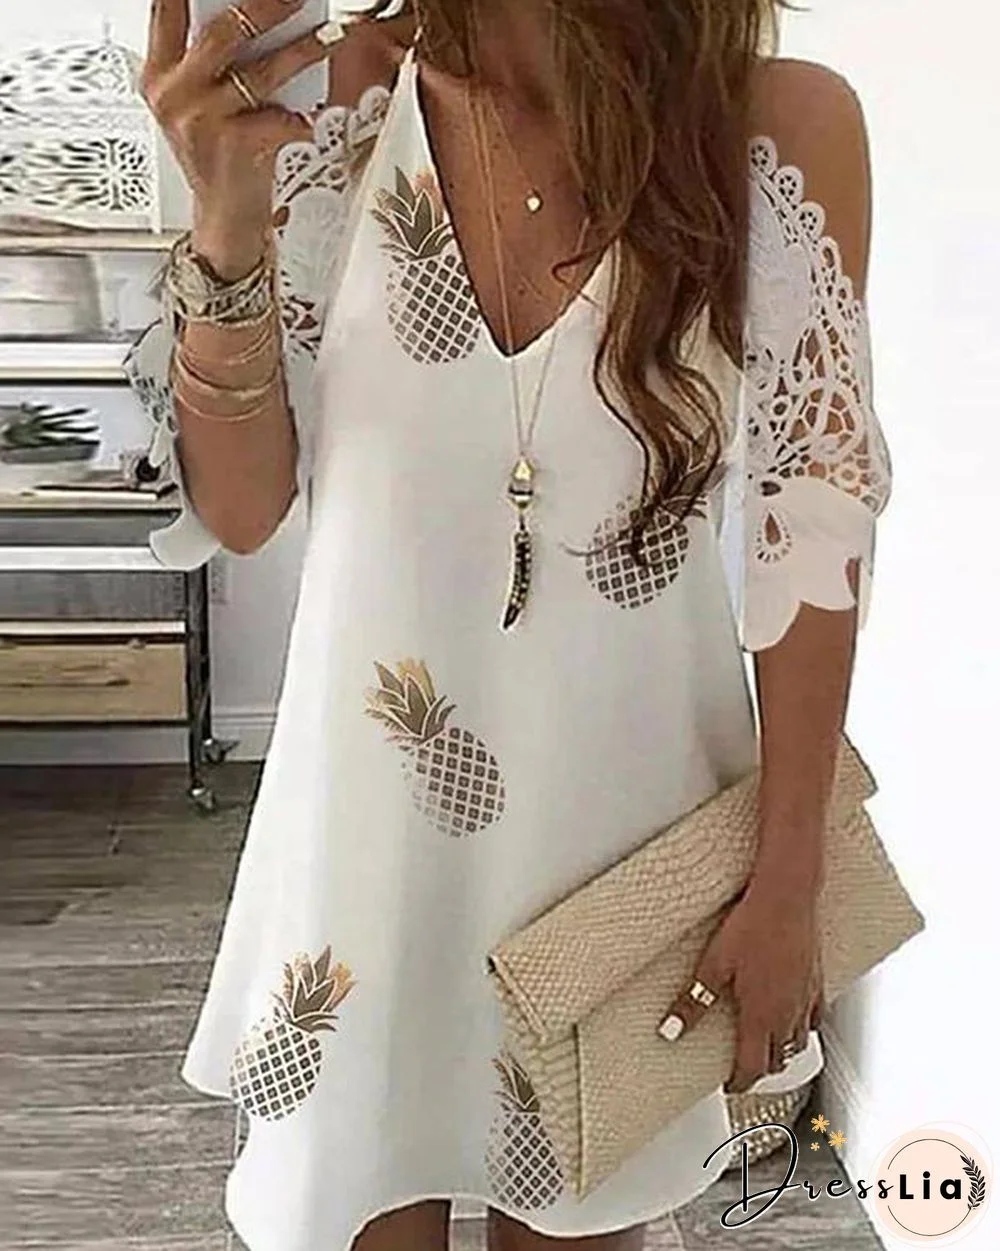 Cold Shoulder Crochet Lace Printed Hollow Out Casual Dress